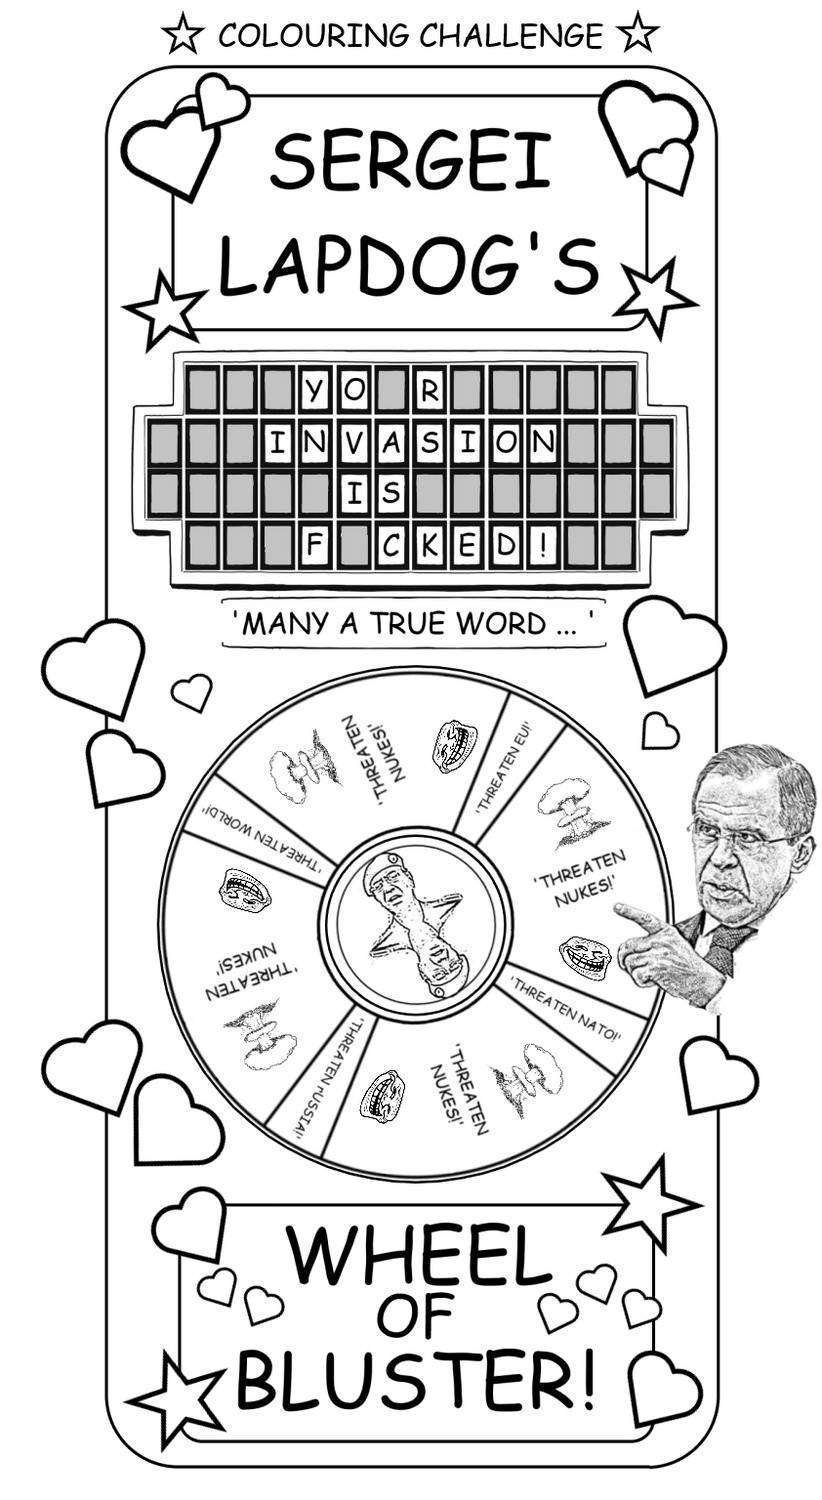 coloring book page about Sergei Lapdog's Wheel of Bluster